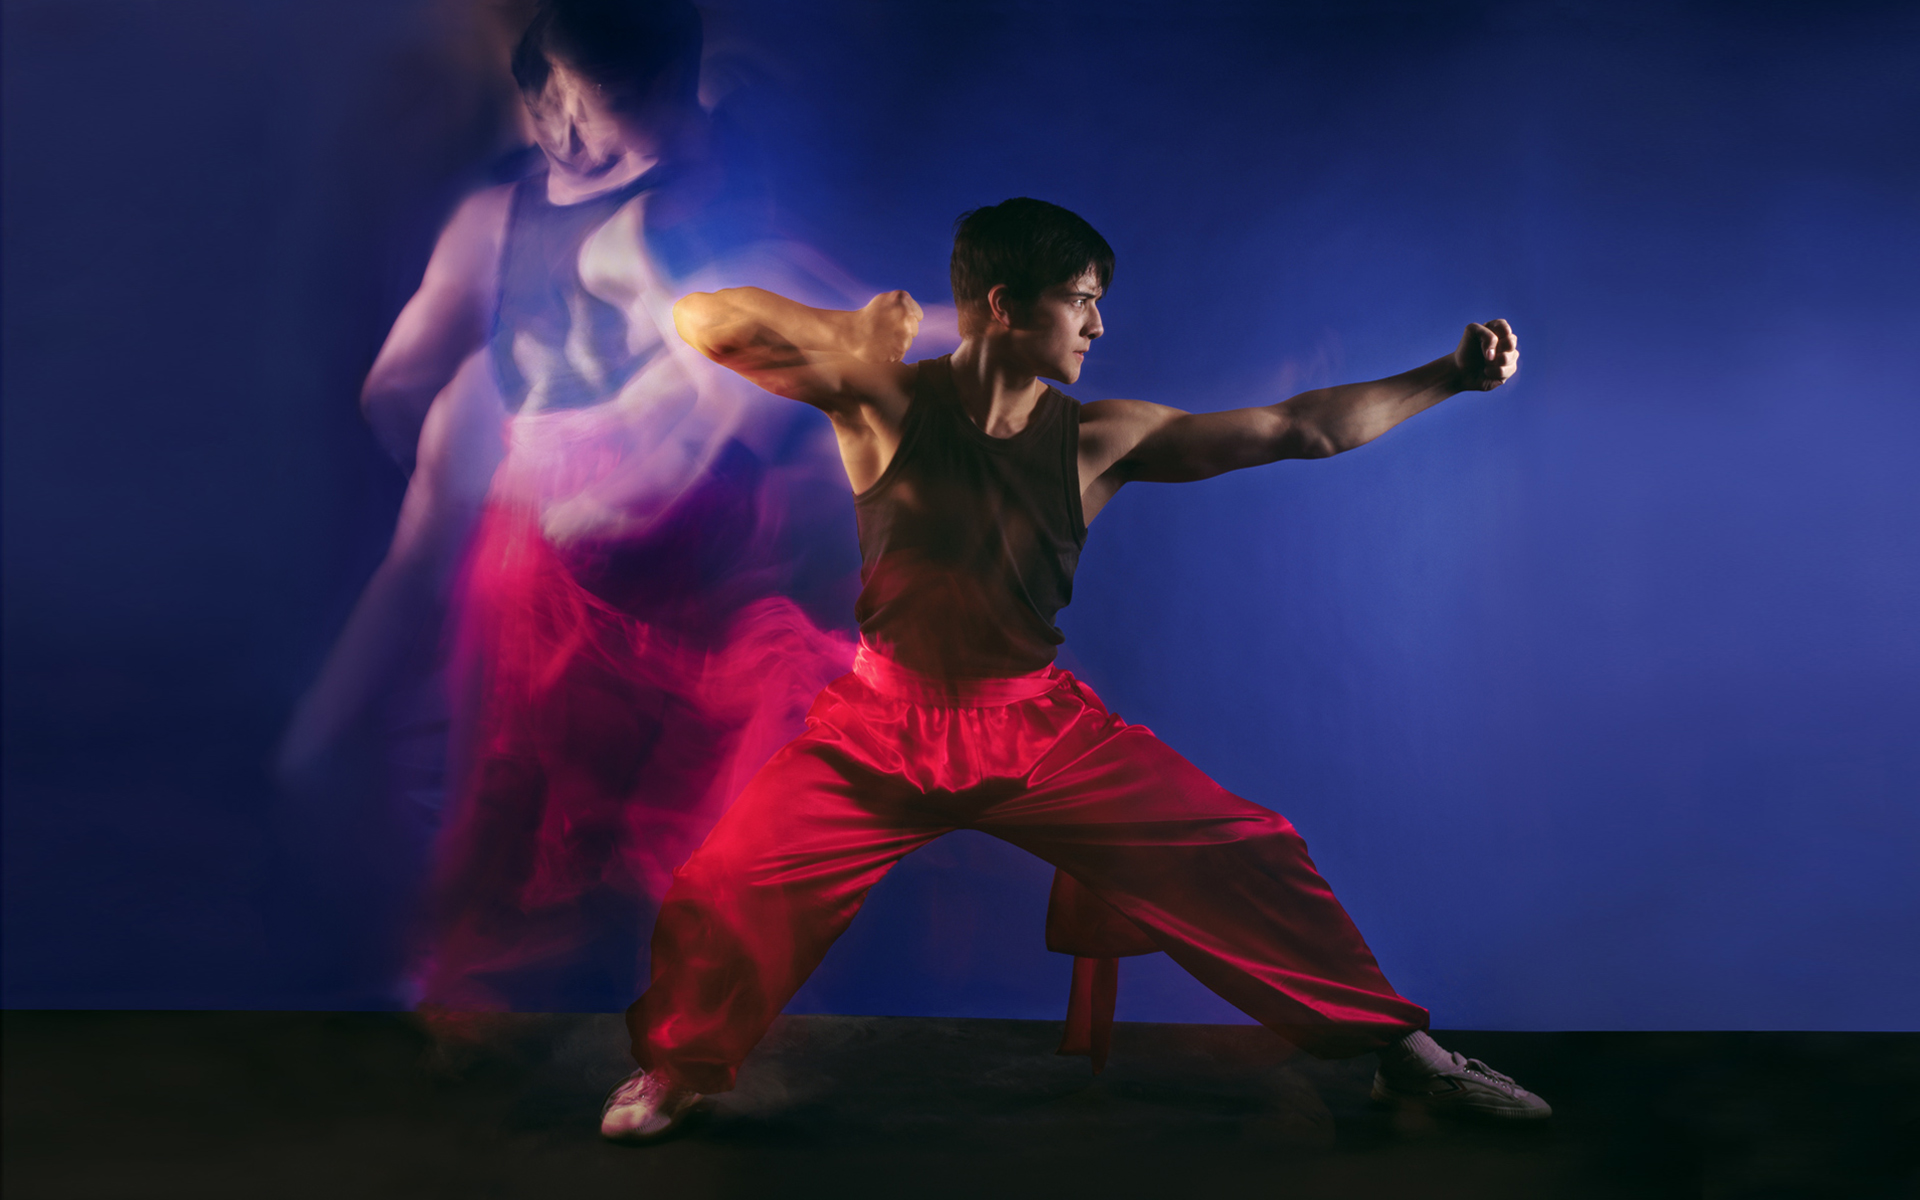 Martial artist performer in a photography studio with motion blur beside him